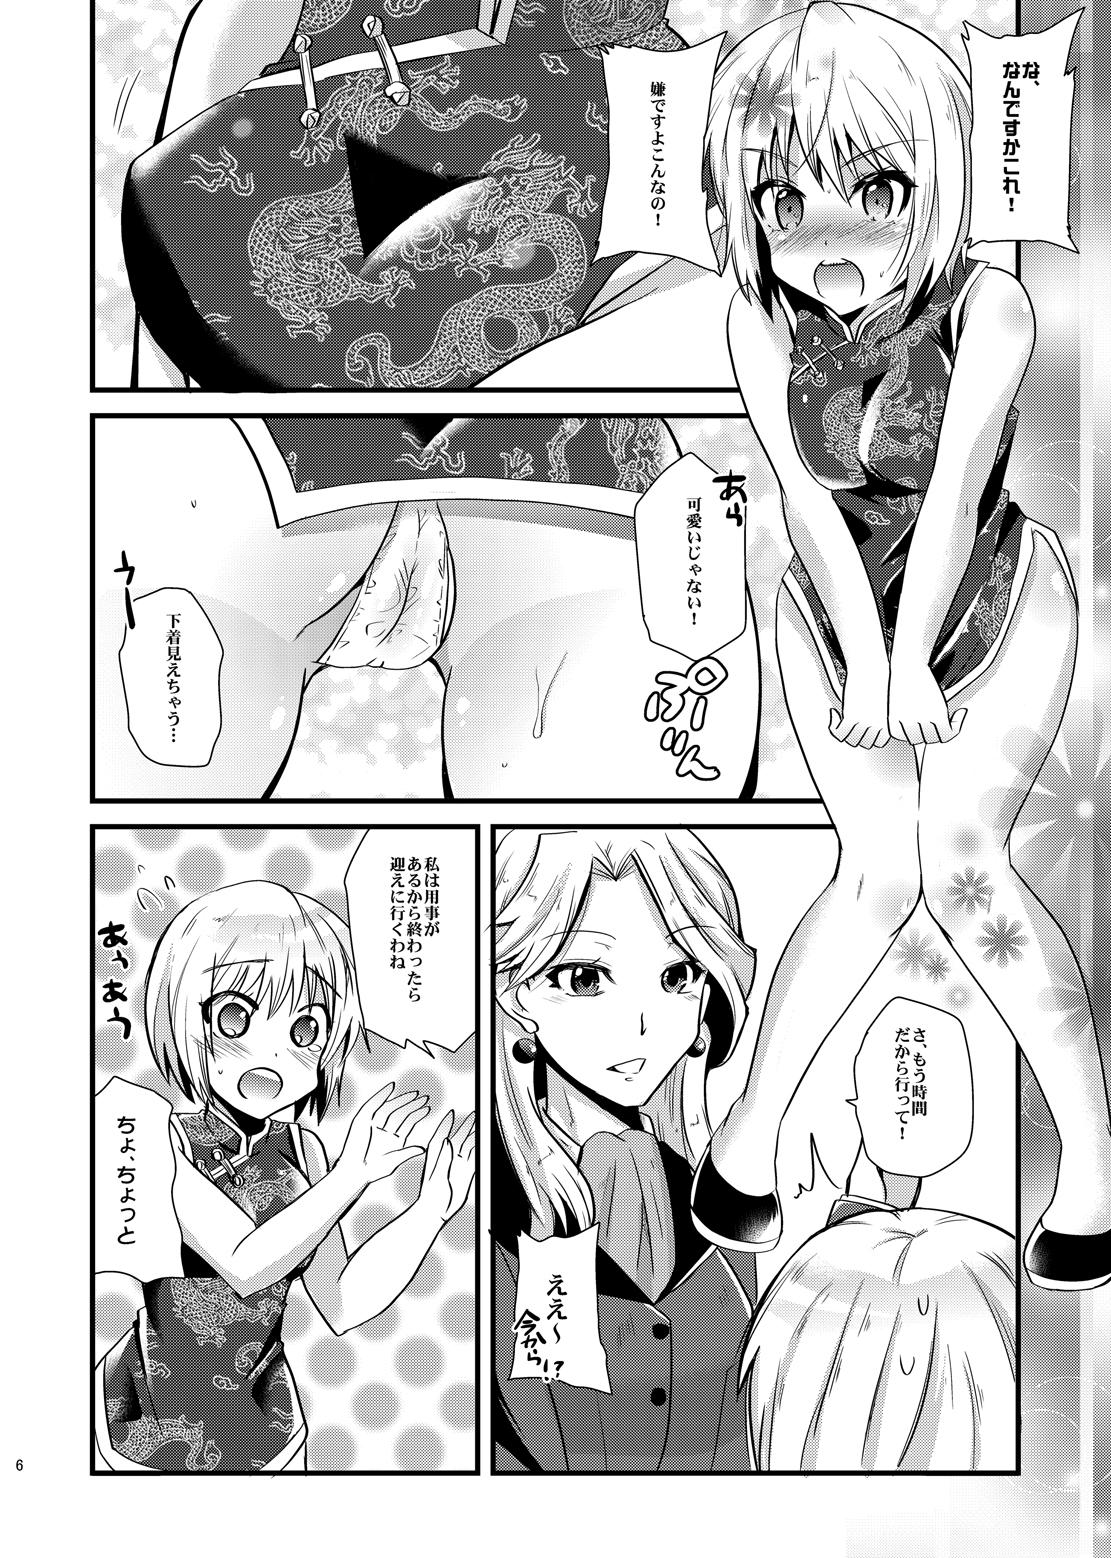 Publico HERO M@STER - Tiger and bunny Cheerleader - Page 5